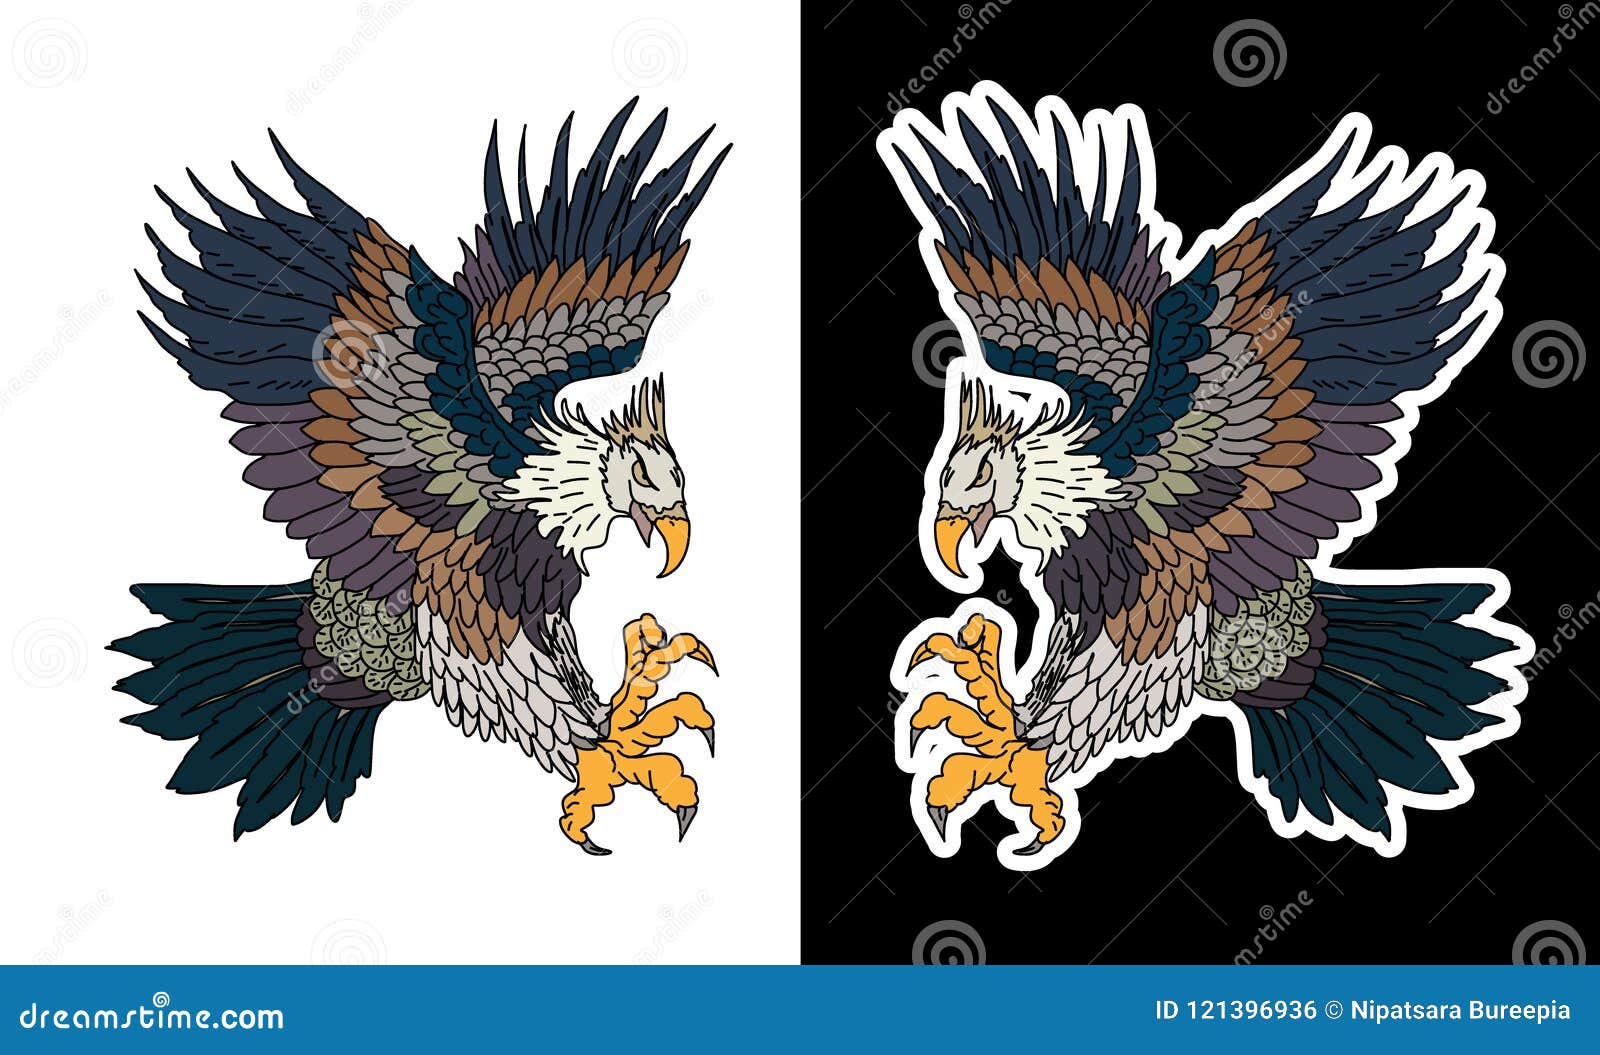 Gold Hand Drawn Traditional Japanese  American Eagle   Tattoo Design. Stock Vector - Illustration of eaglenative, background:  121396936